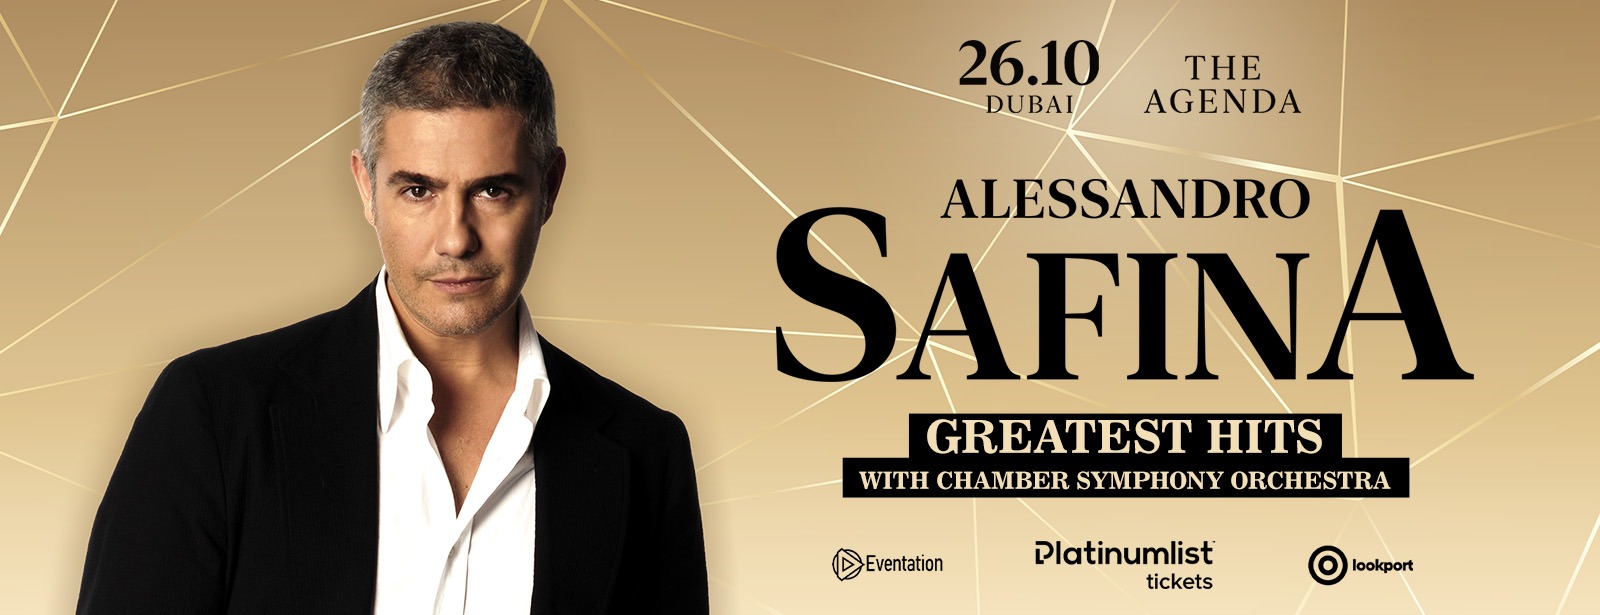 Alessandro Safina Live Concert at The Agenda - Coming Soon in UAE